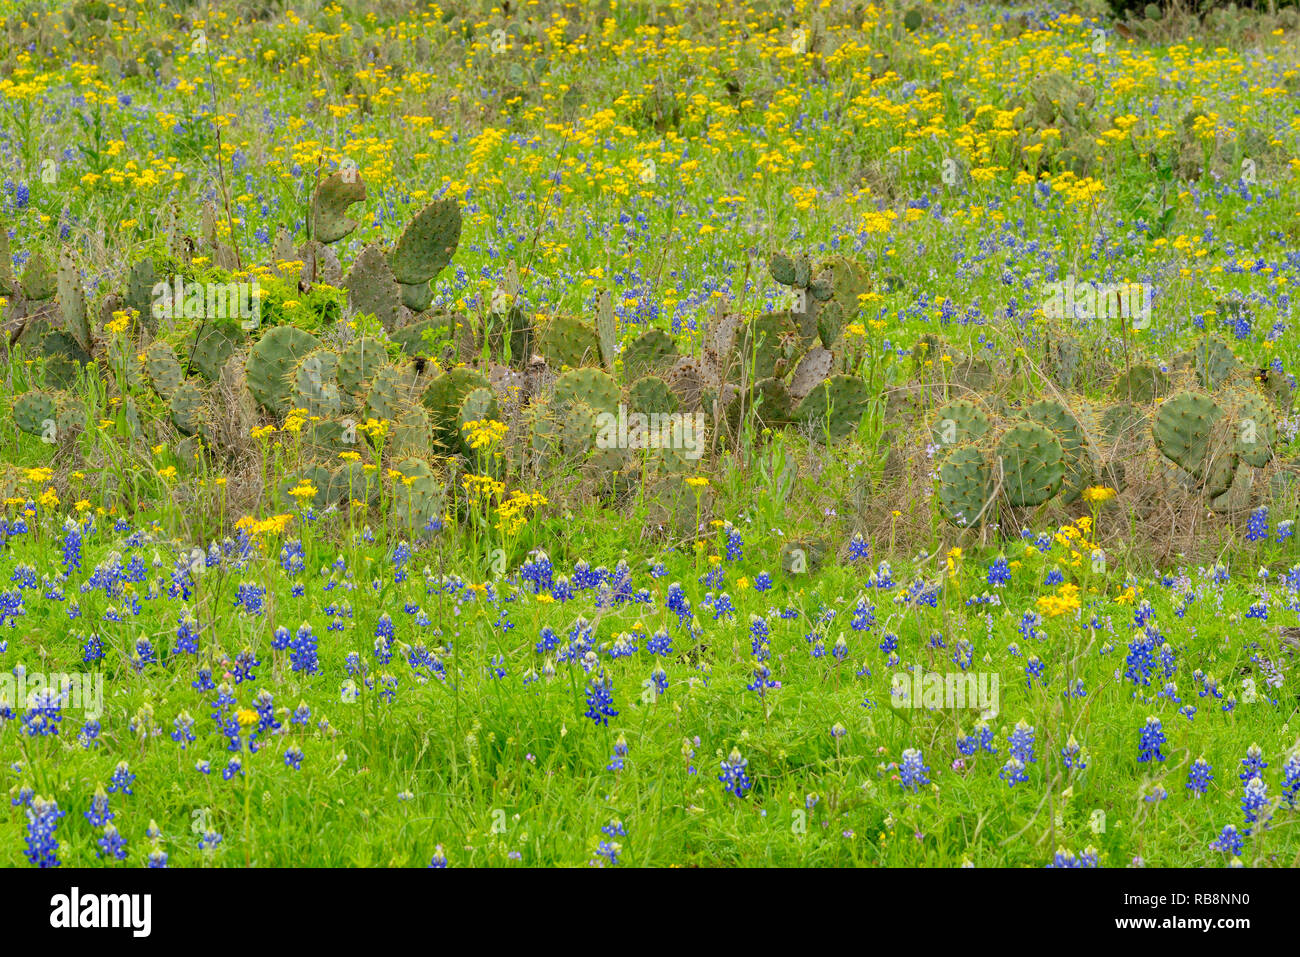 Flowering bluebonnets and prickly pear cactus, Sandy Road, Round Mountain, Texas, USA Stock Photo